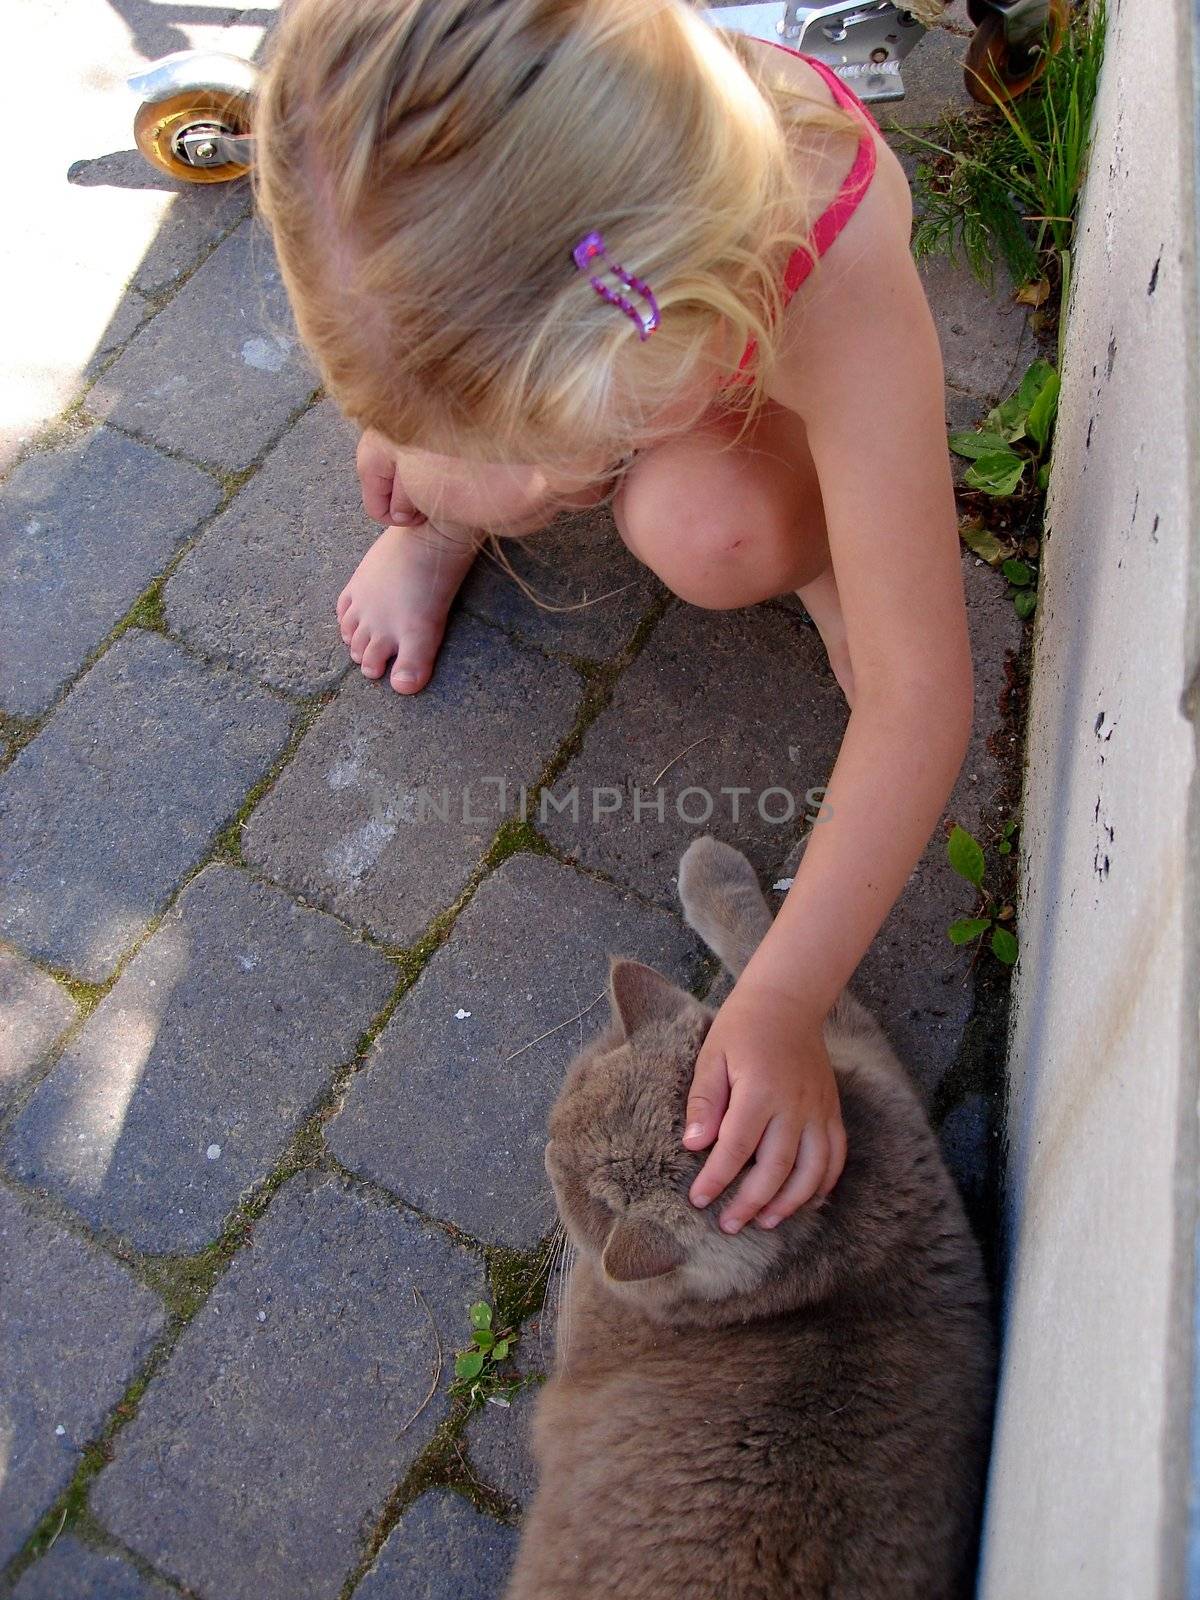 girl and cat. Please note: No negative use allowed.